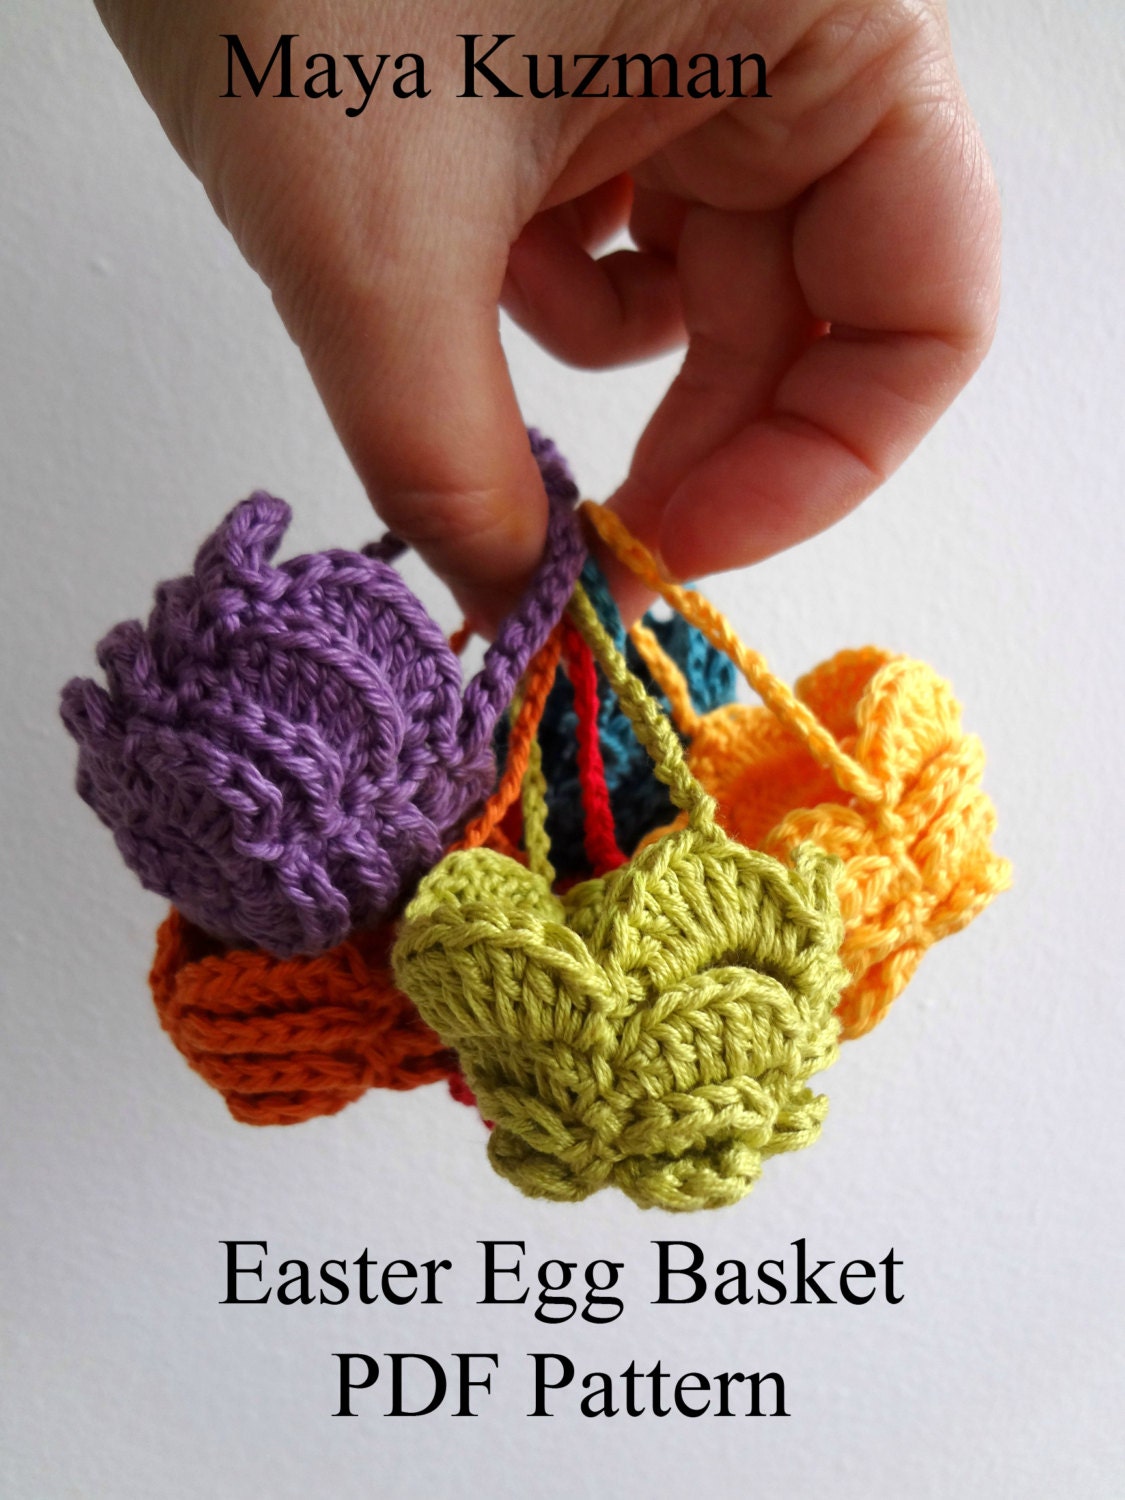 Easter Egg Crocheted Basket -  egg cozy - PDF Pattern - photo tutorial, sell what you make - sewella